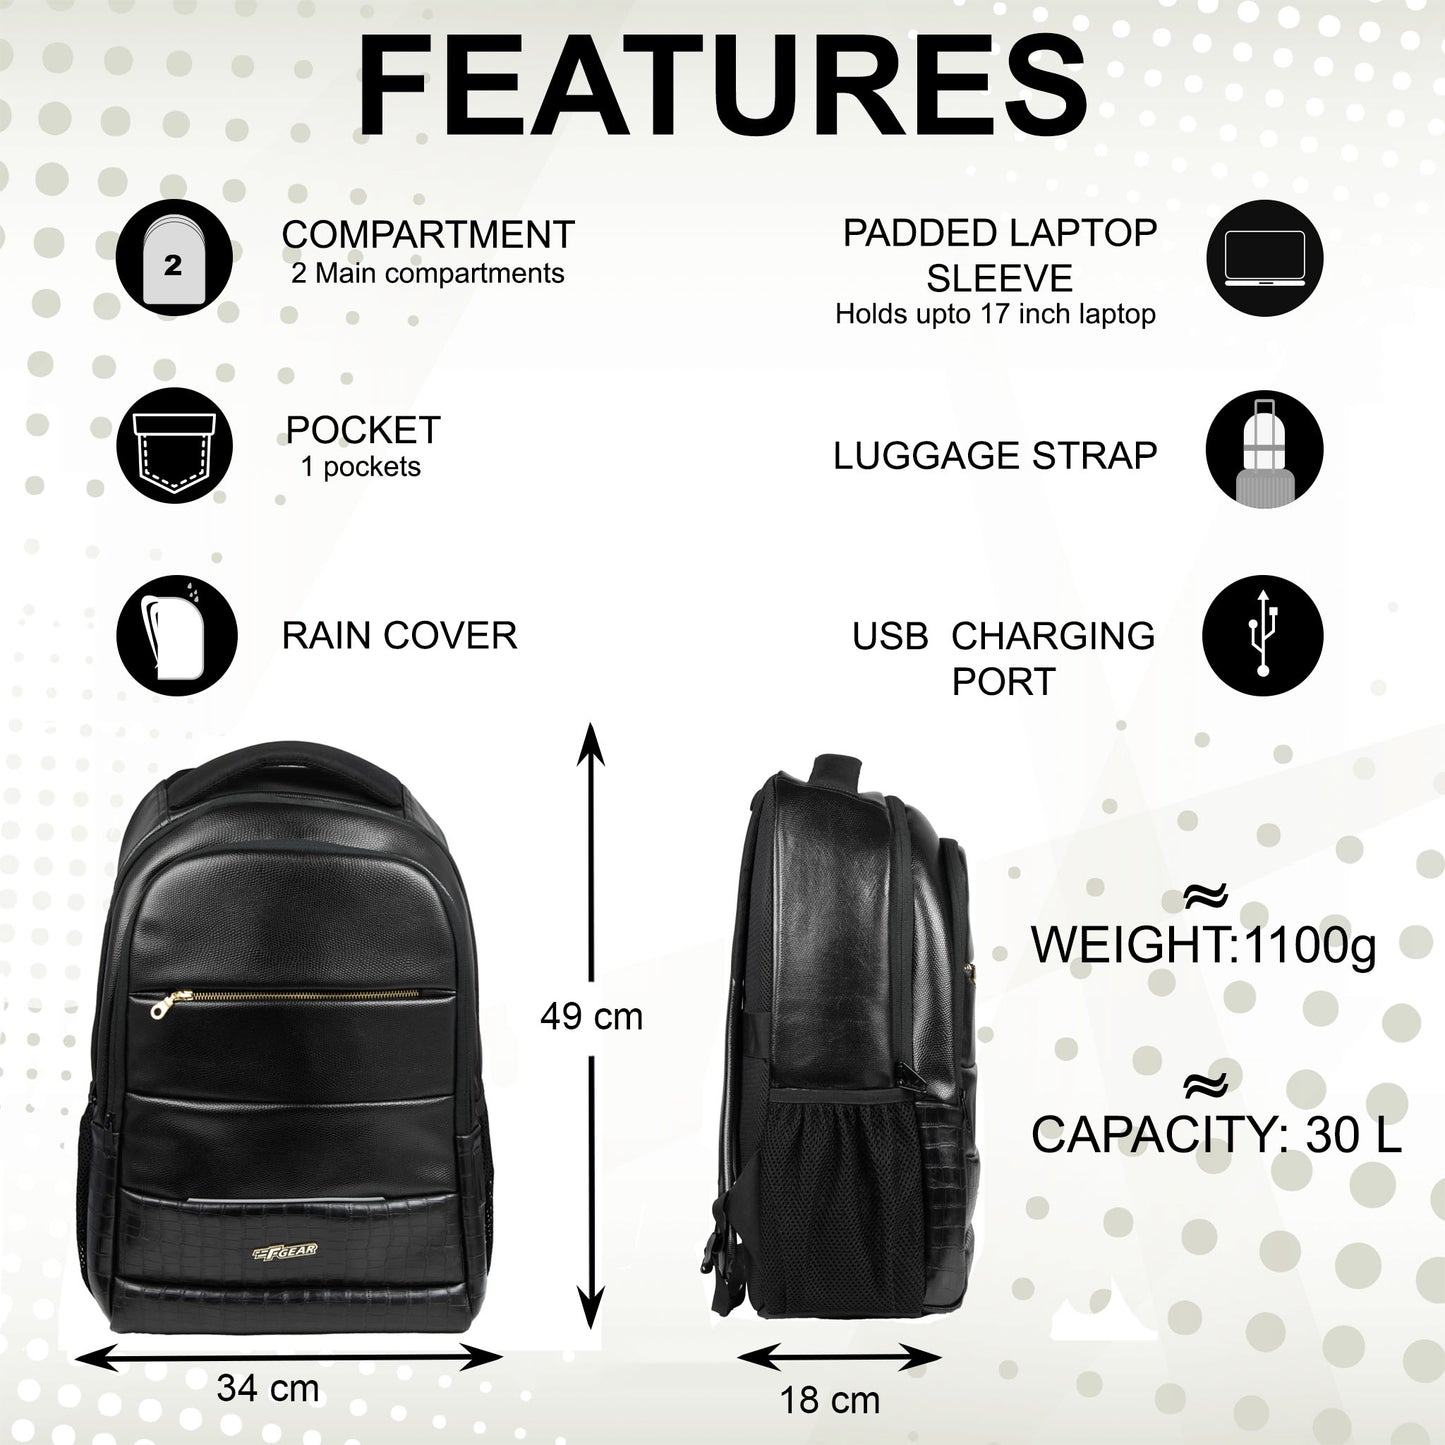 Zurich 30L Black Vegan Leather USB Laptop Backpack with Raincover